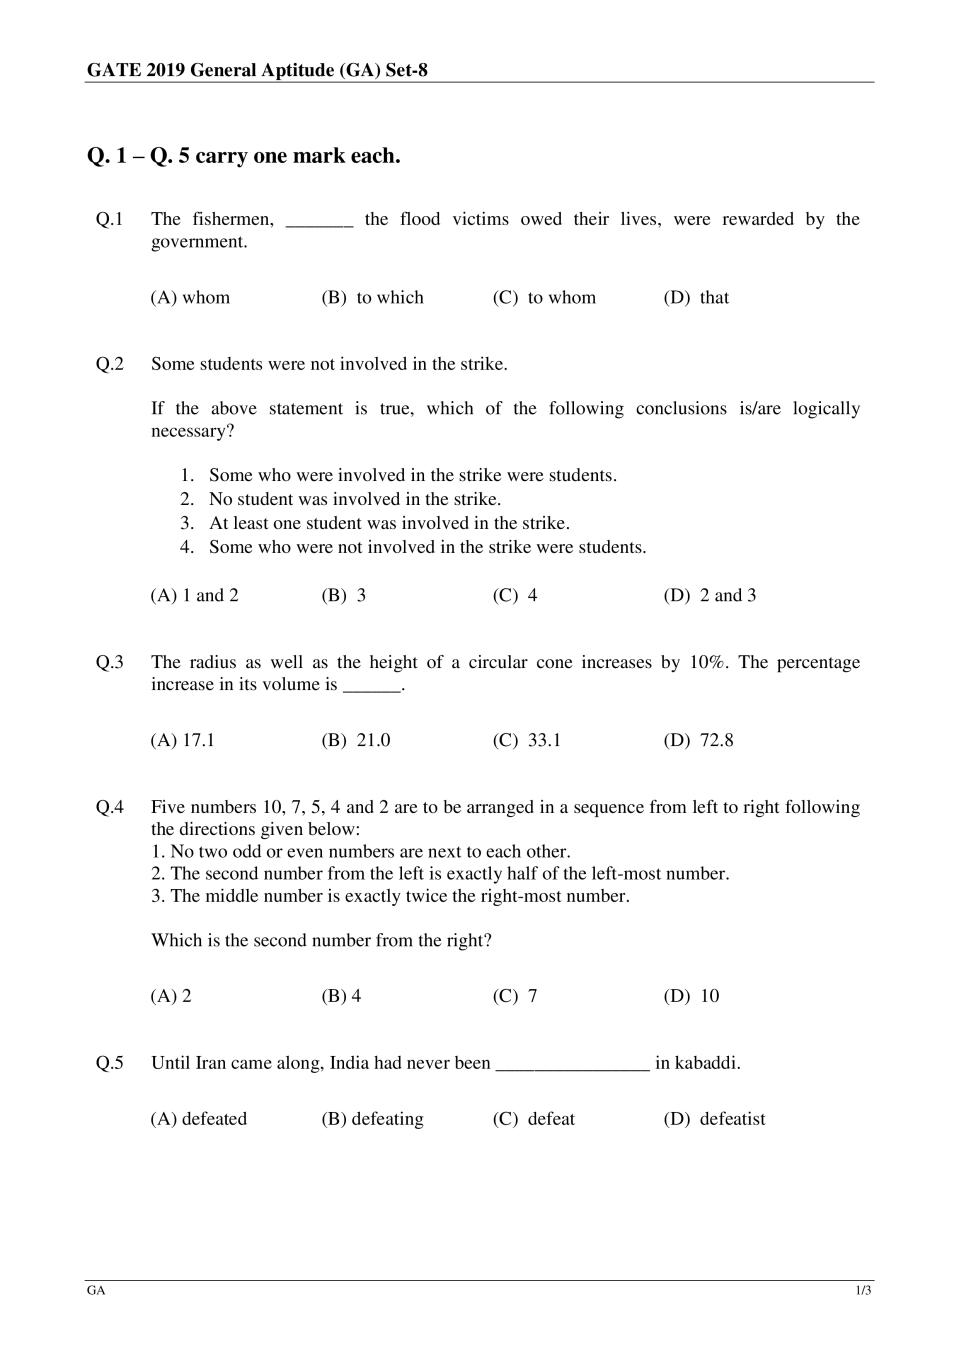 GATE 2019 GEOLOGY _ GEOPHYSICS Question Paper with Answer - Page 1